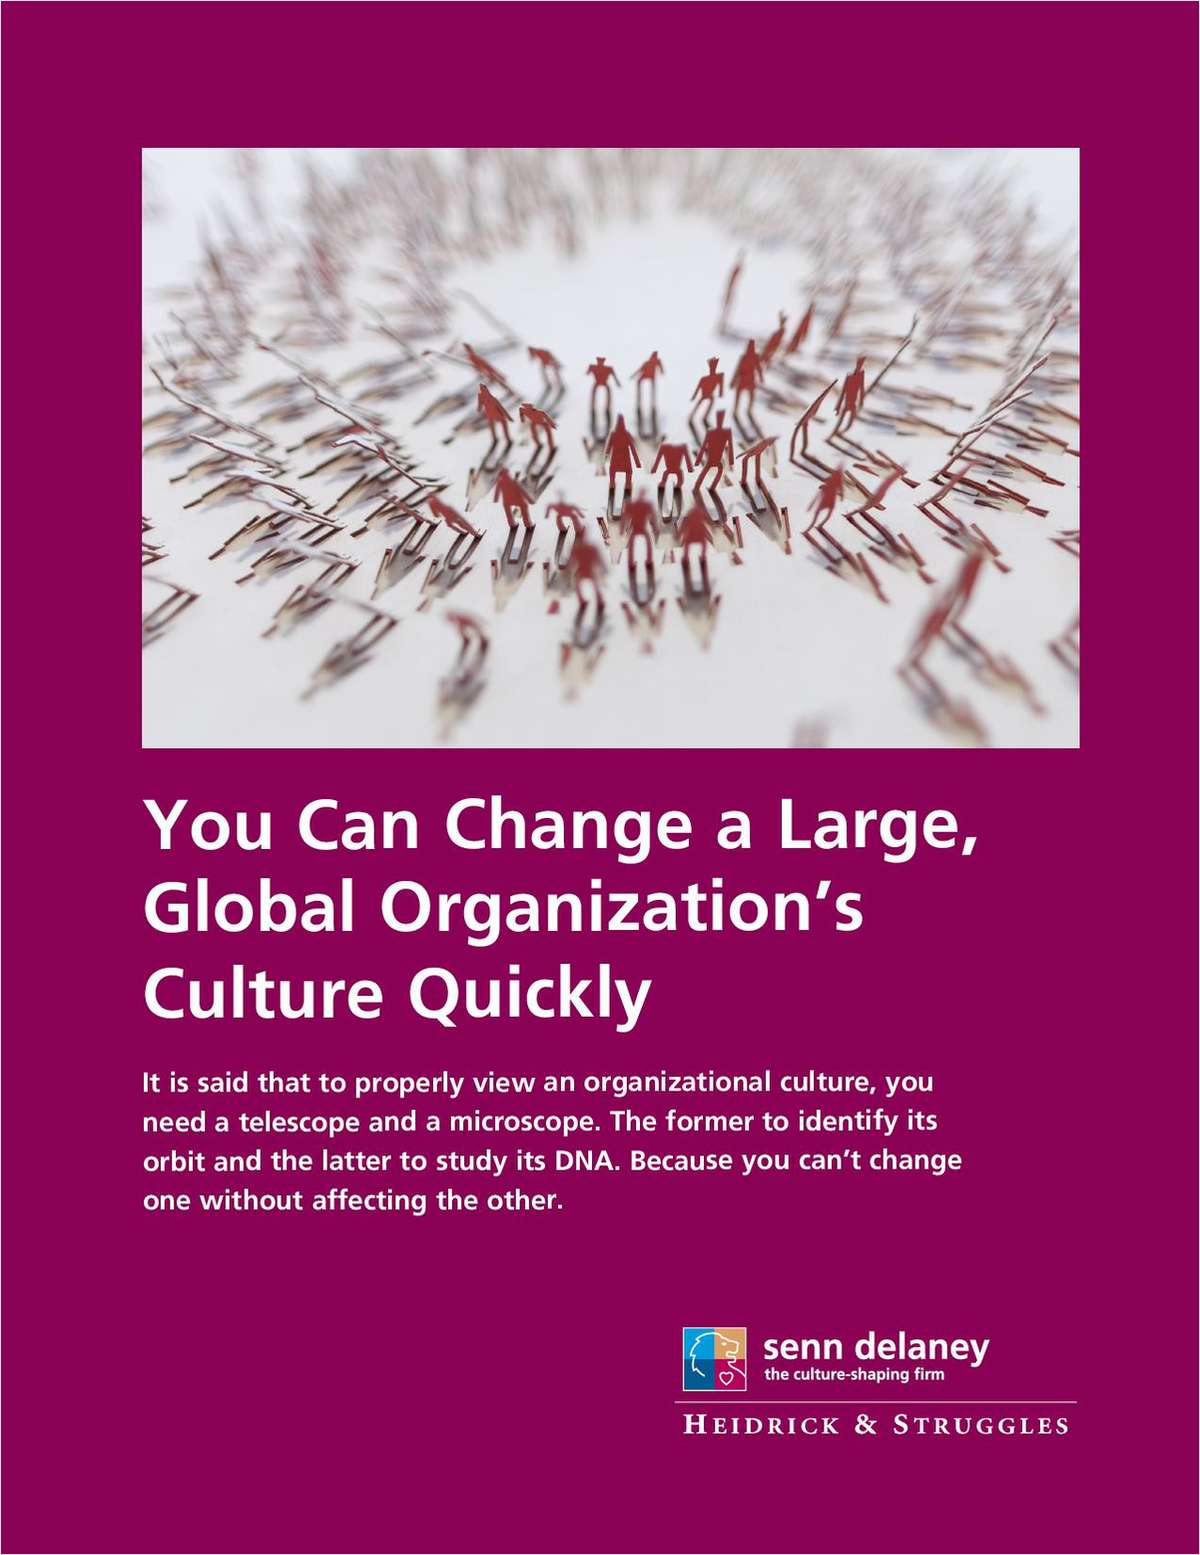 You Can Change a Large, Global Organization's Culture Quickly